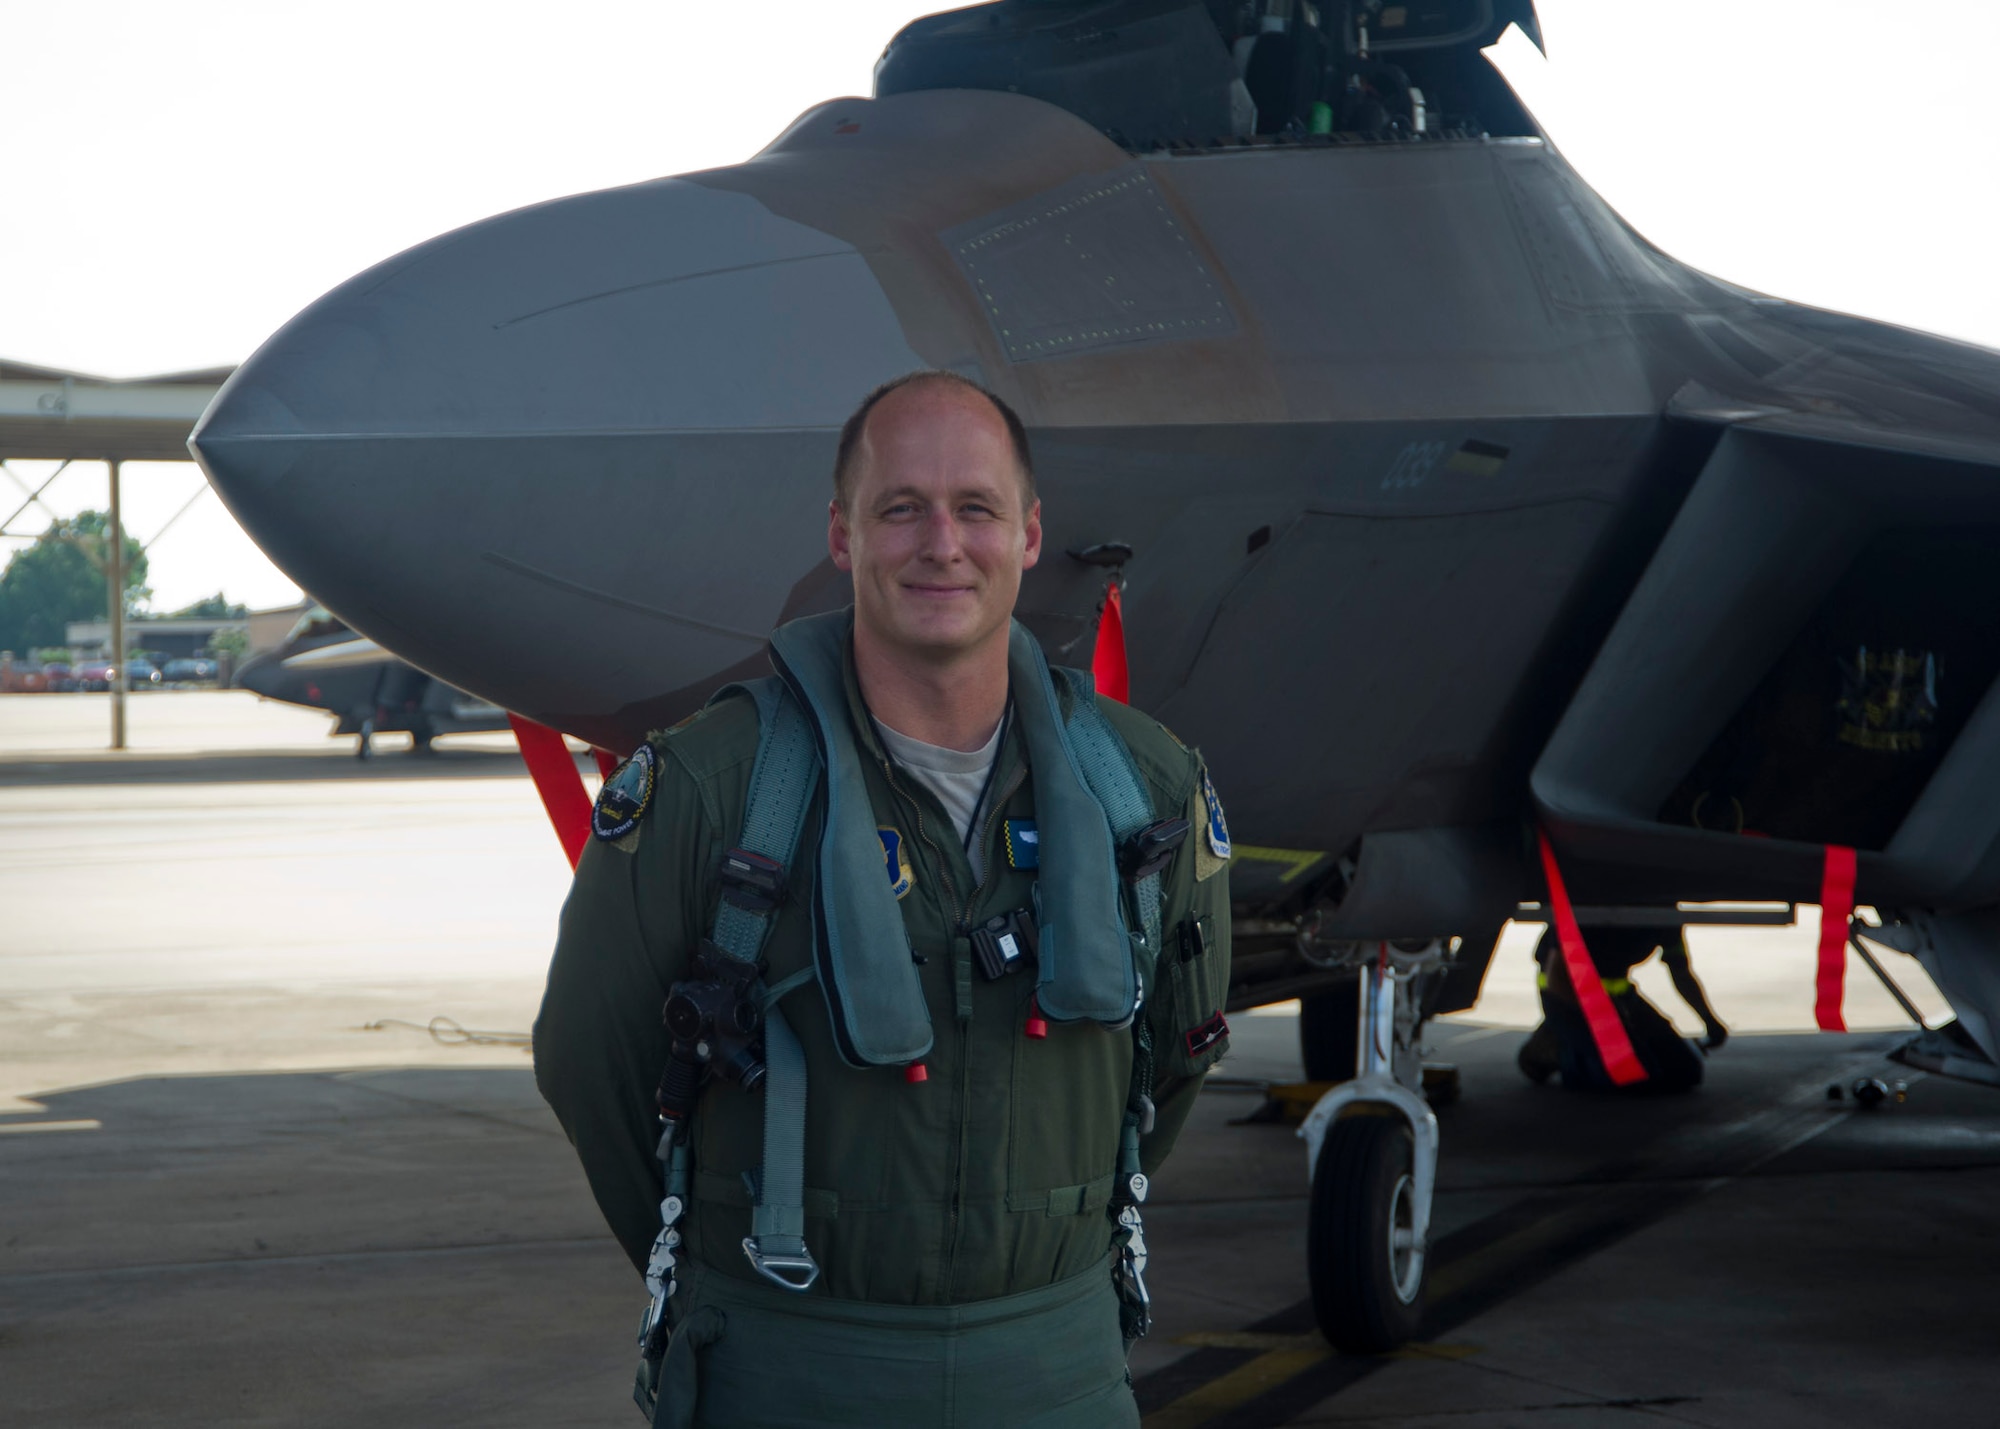 Major Daniel “Magic” Lee, 43rd Fighter Squadron instructor pilot, stands in front of the F-22 Raptor, which he reached his 1,000th hour of flight time in, on July 8. He is currently only the fifth person in Air Force history to achieve this milestone. (U.S. Air Force photo by Airman 1st Class Dustin Mullen)